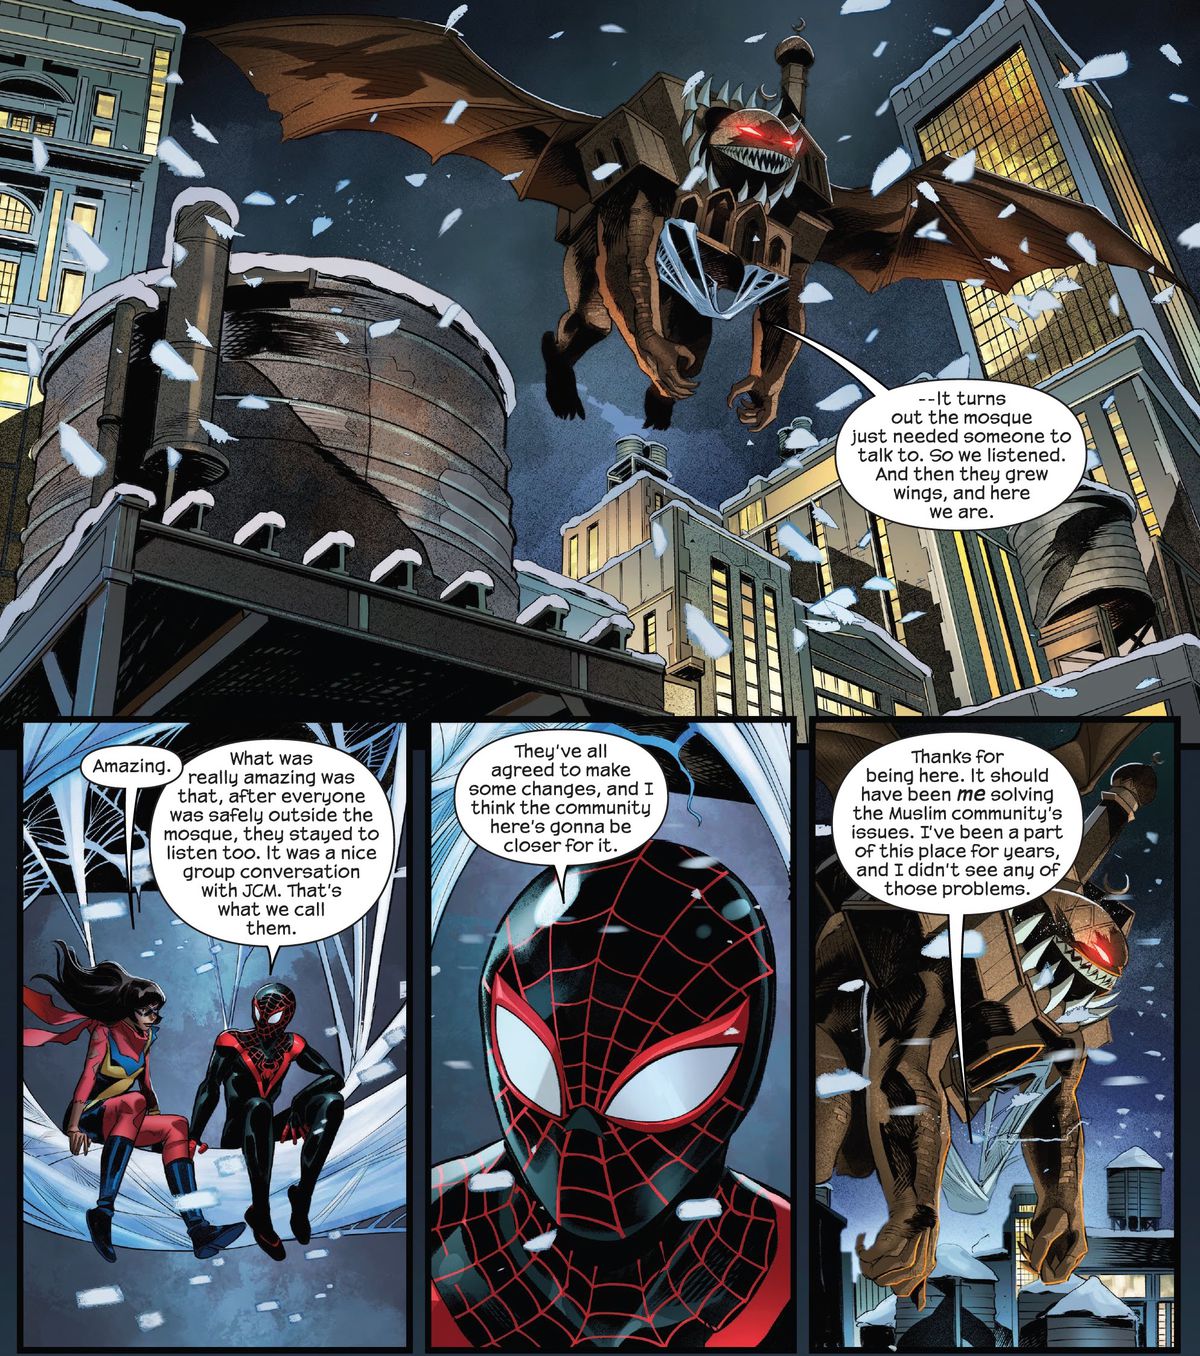 Miles Morales/Spider-Man and Ms. Marvel chat about how Miles helped her mosque’s congregants make friends with their mosque, which has been given life in the form of a huge fanged demon. They are sitting on a swing made of spider-webs as it flies back to Jersey City in Dark Web: Ms. Marvel #2. 